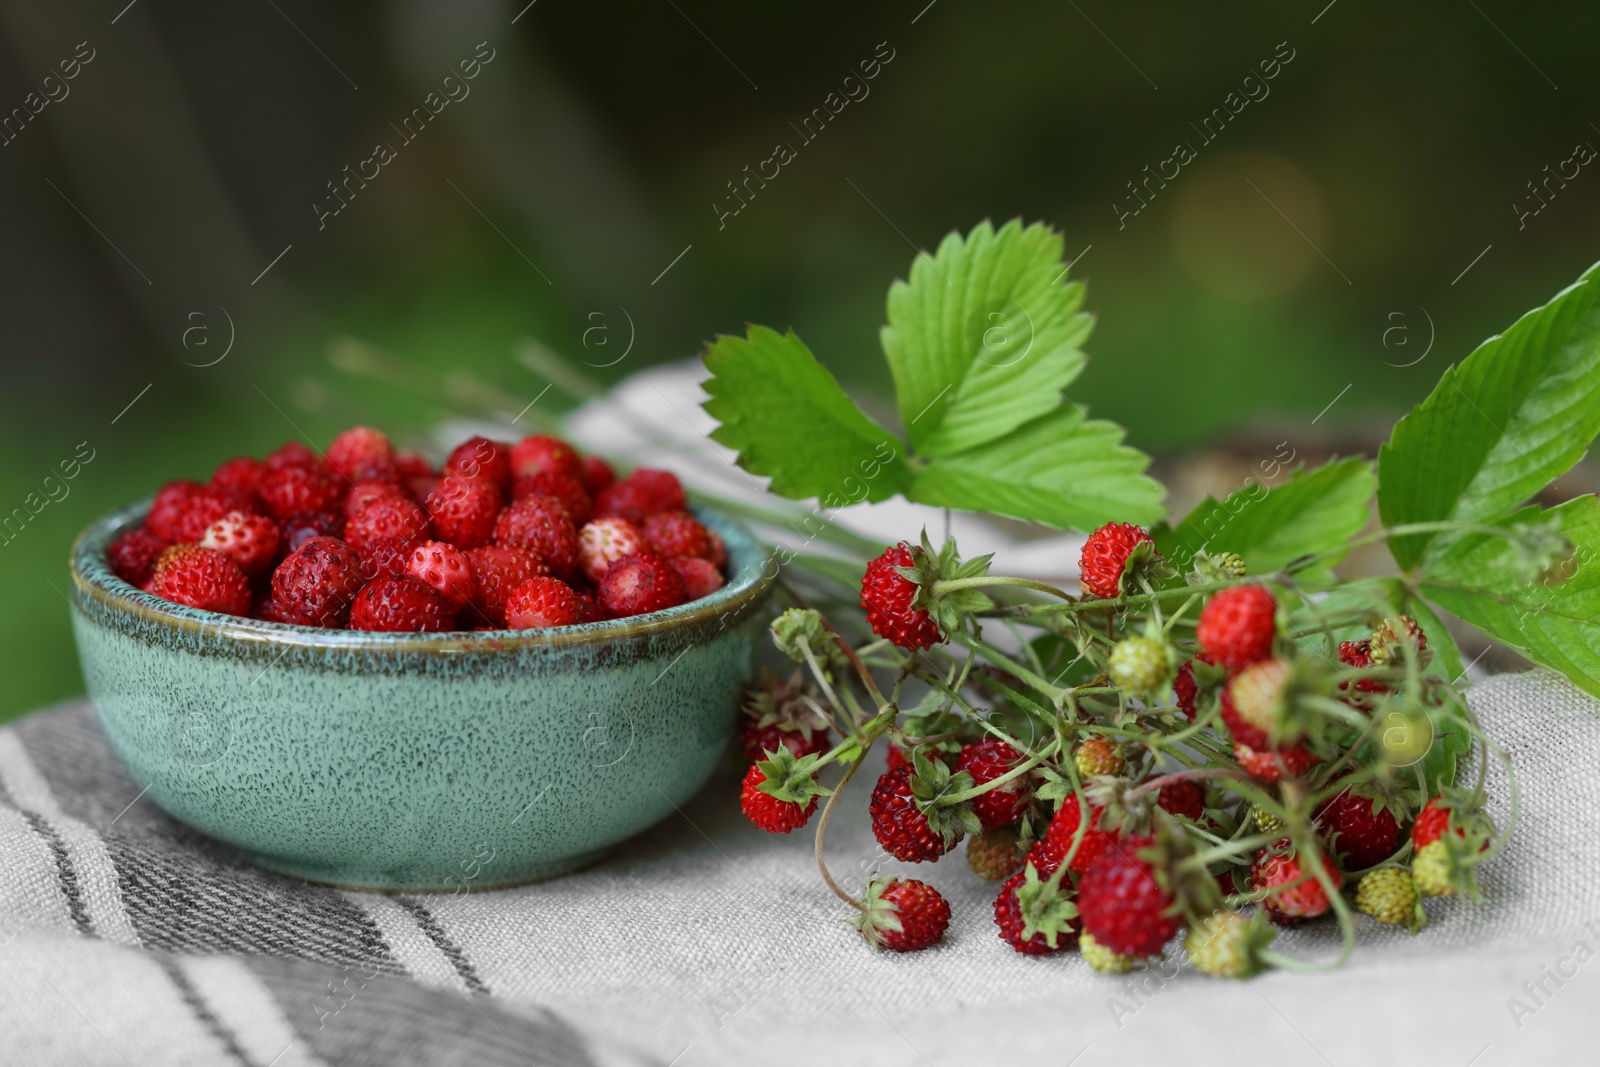 Photo of Bowl and tasty wild strawberries on cloth against blurred background